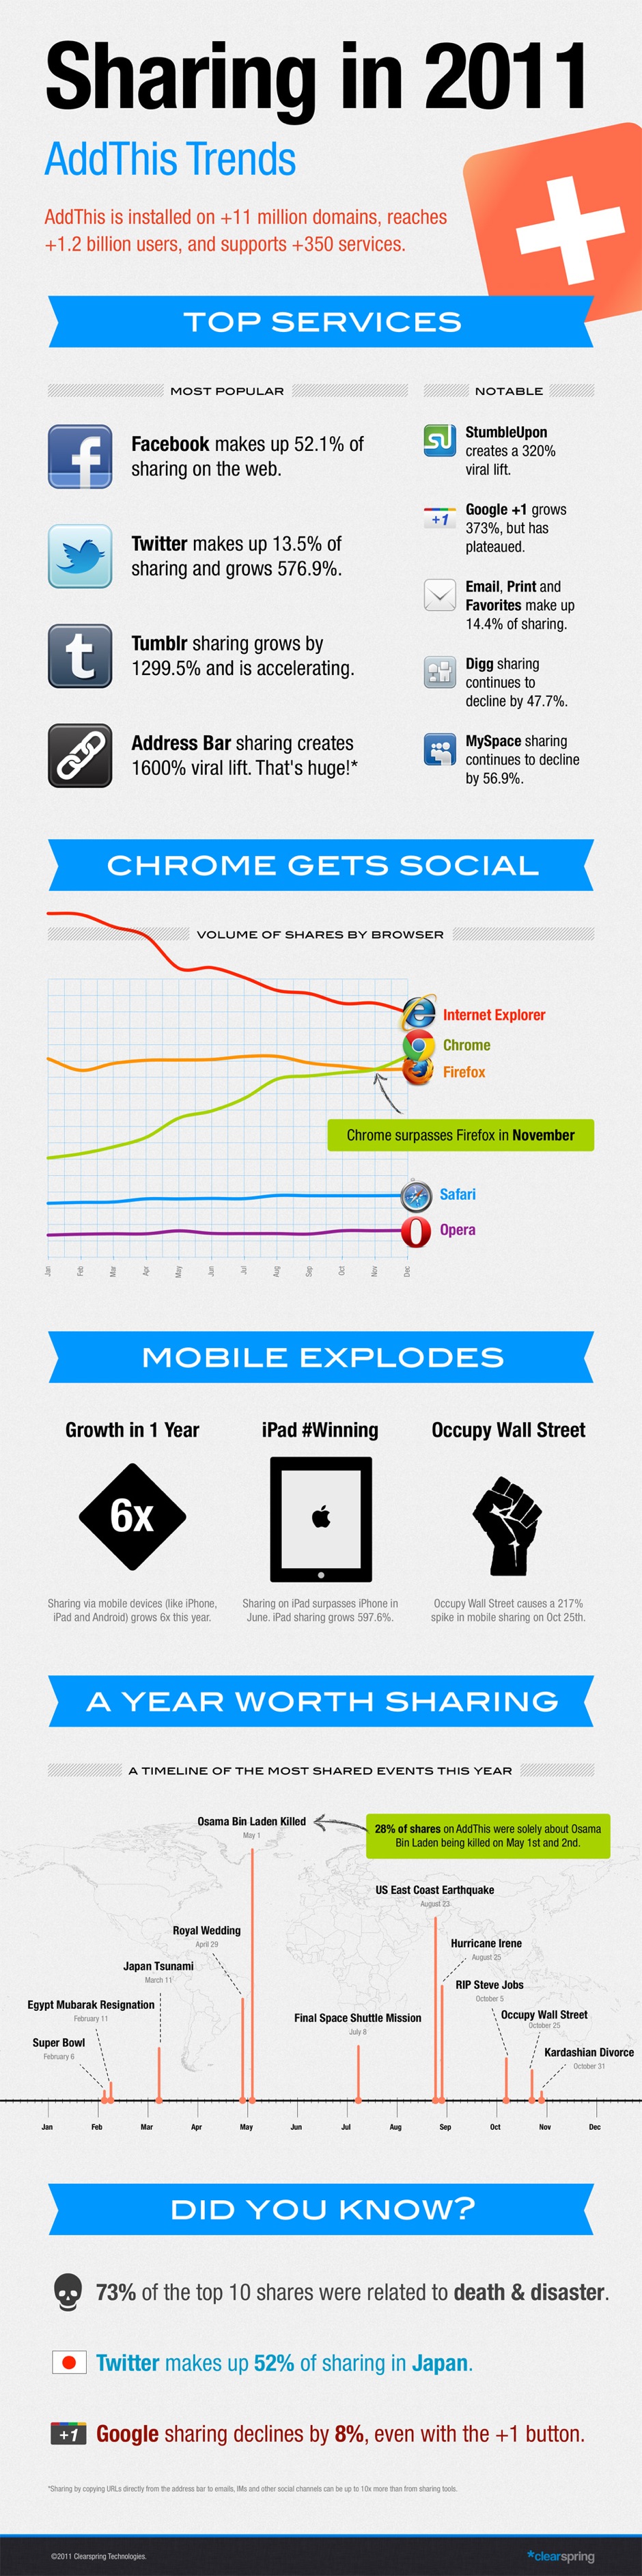 2011-addthis-trends-infographic-1000px.jpg